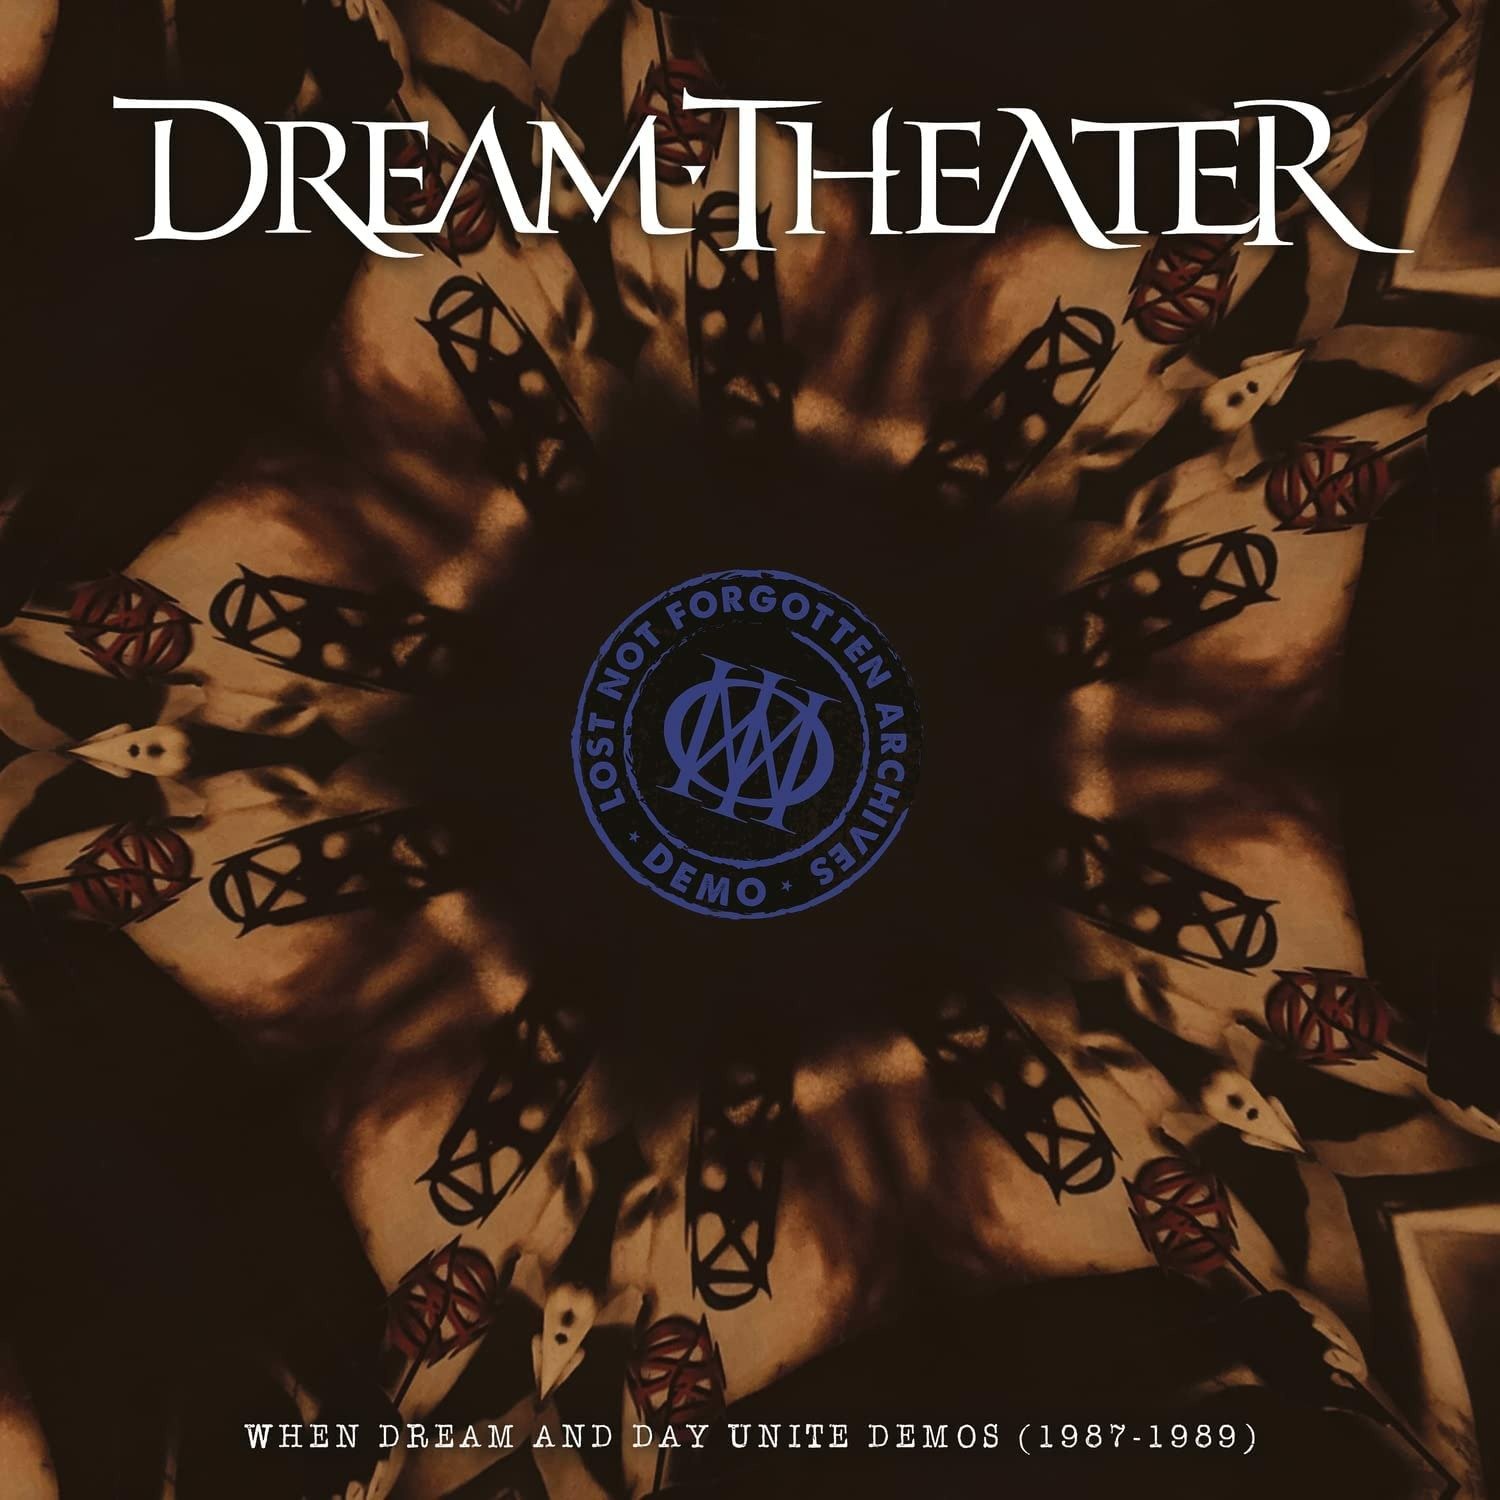 CD Shop - DREAM THEATER LOST NOT FORGOTTEN ARCHIVES: WHEN DREAM AND DAY UNITE DEMOS (1987-1989) -SPEC-